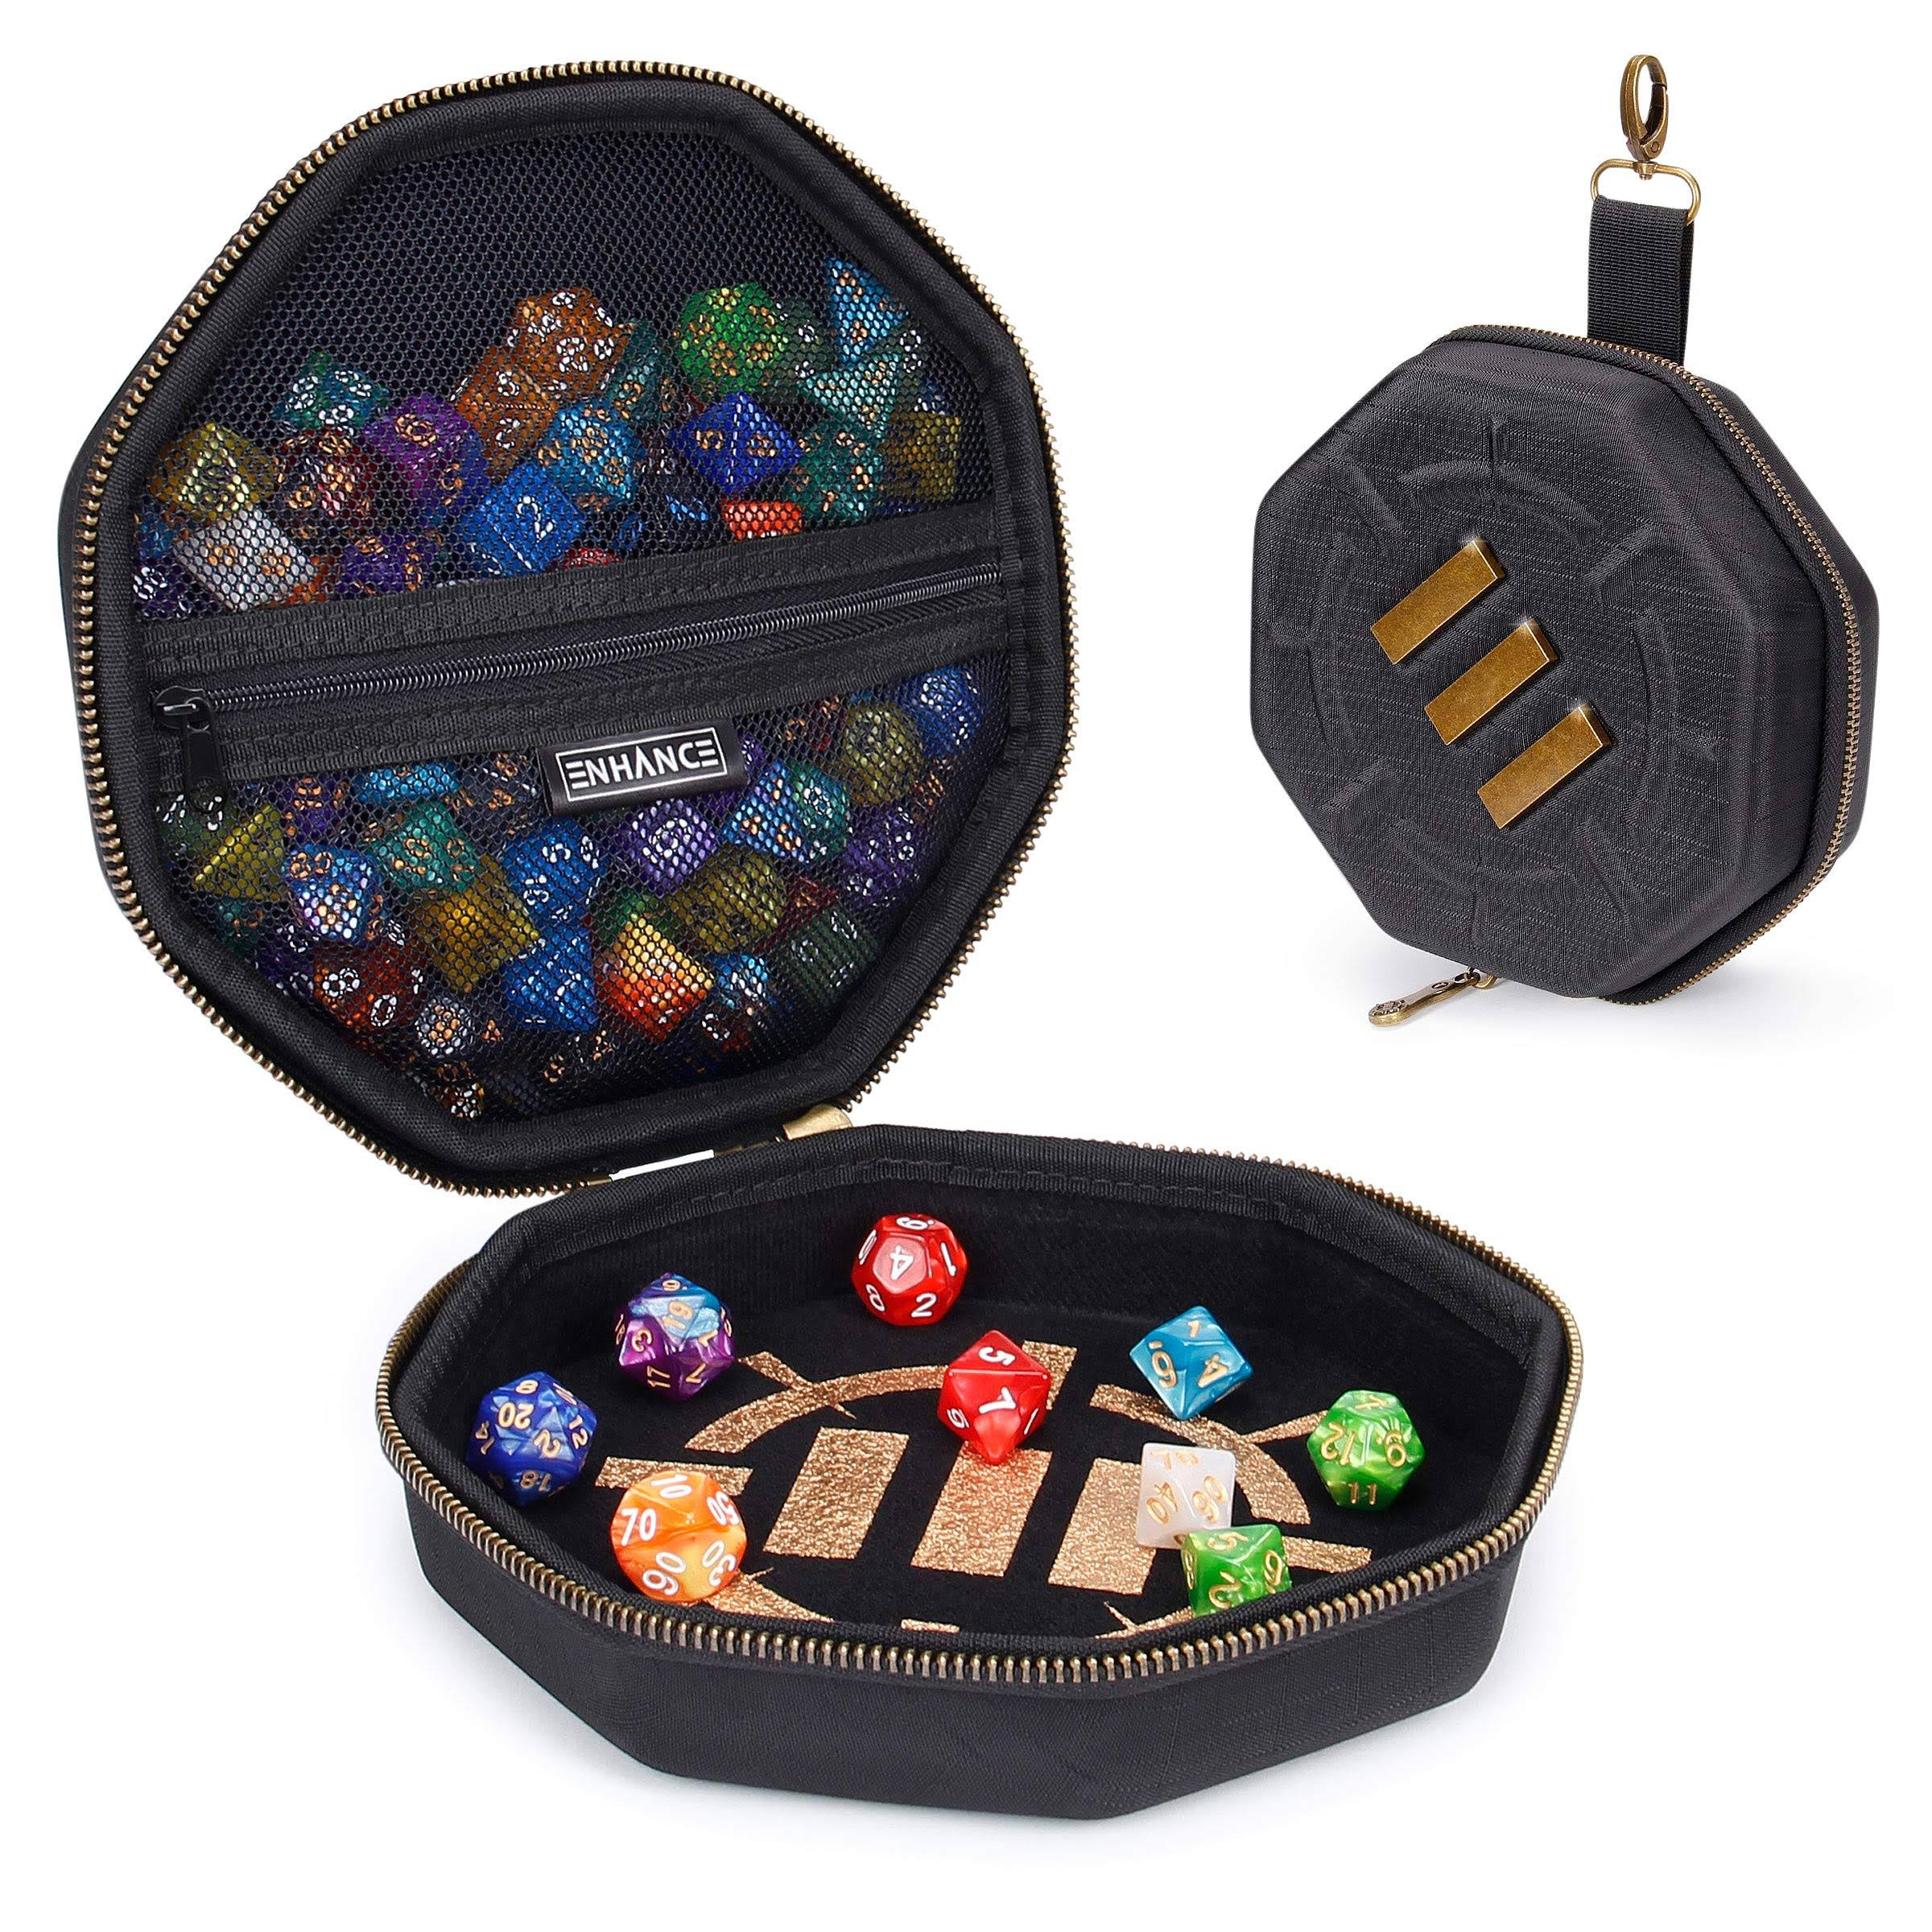 Enhance Tabletop Dice Case And Dice Rolling Tray